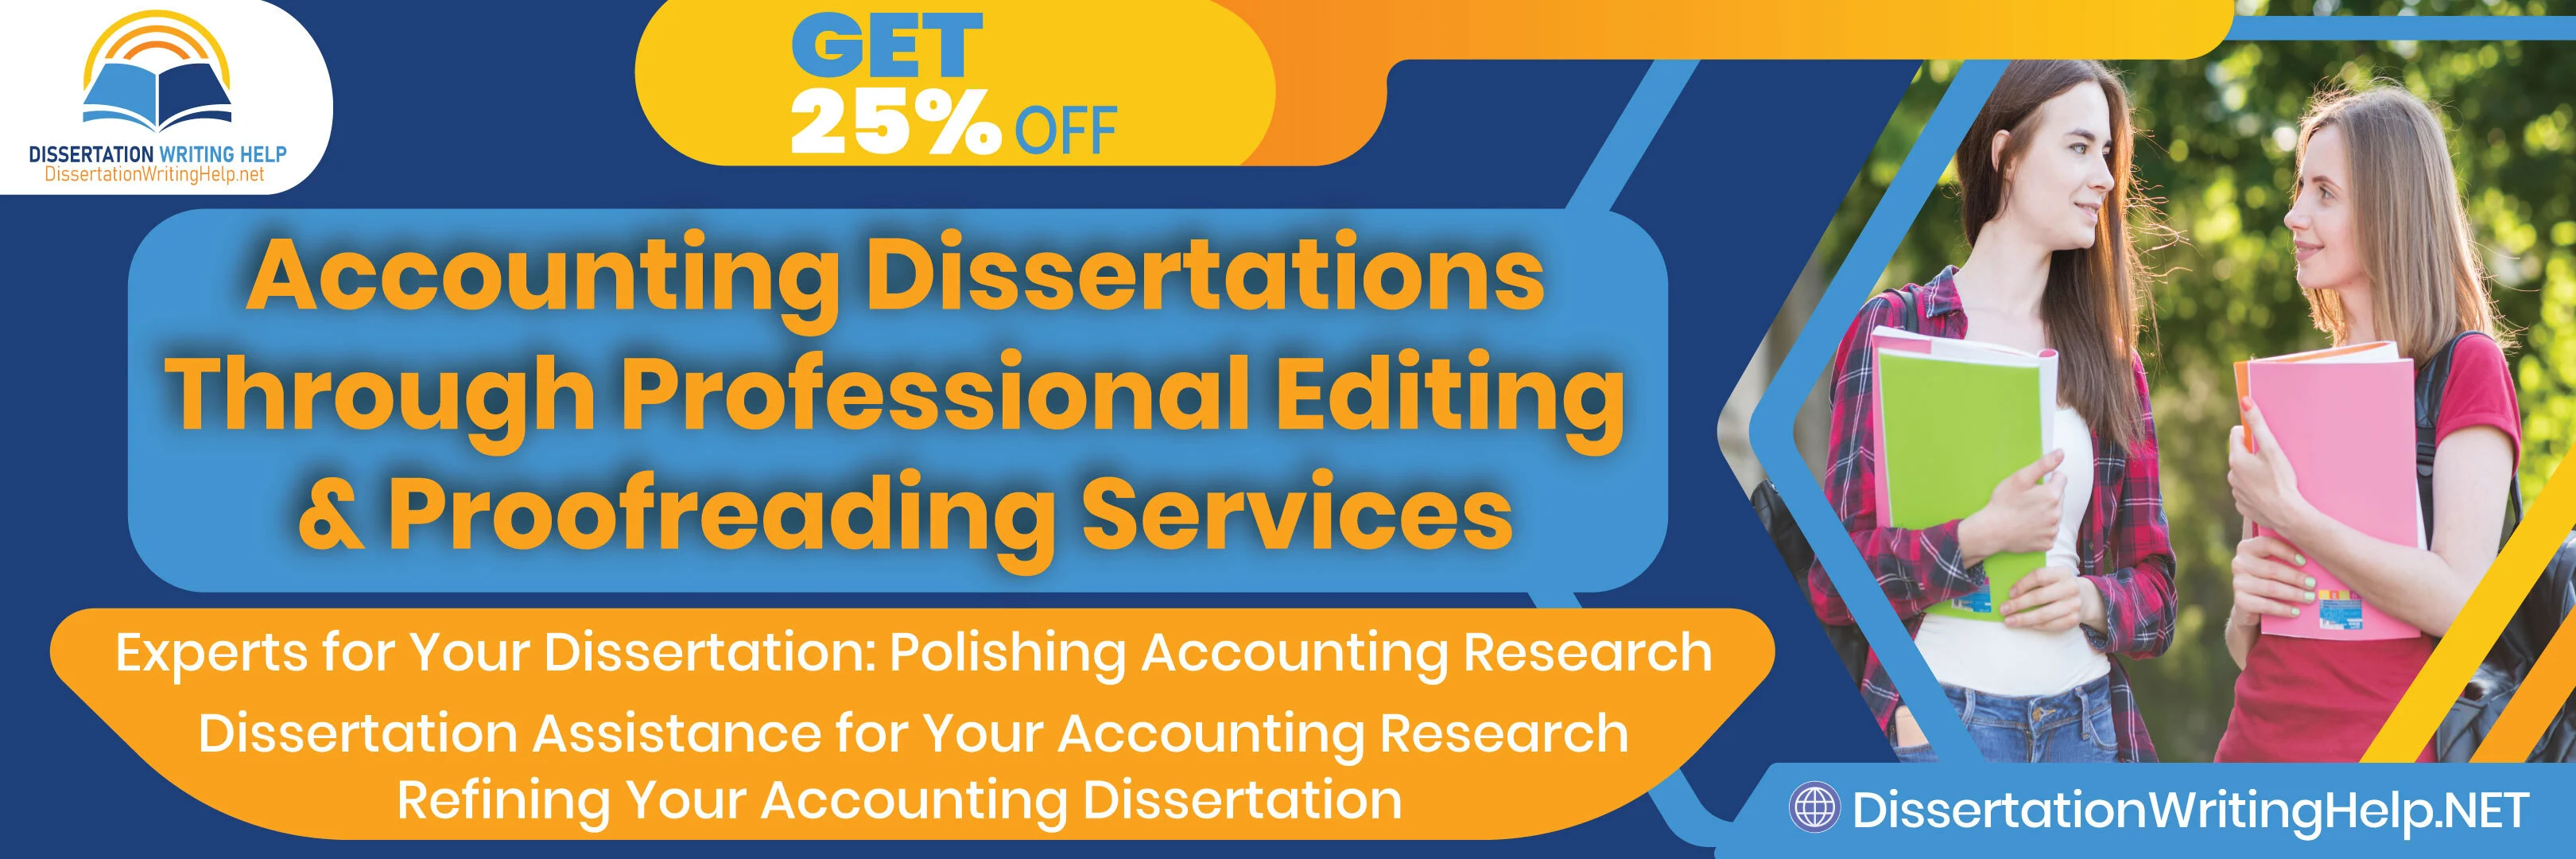 accounting dissertations